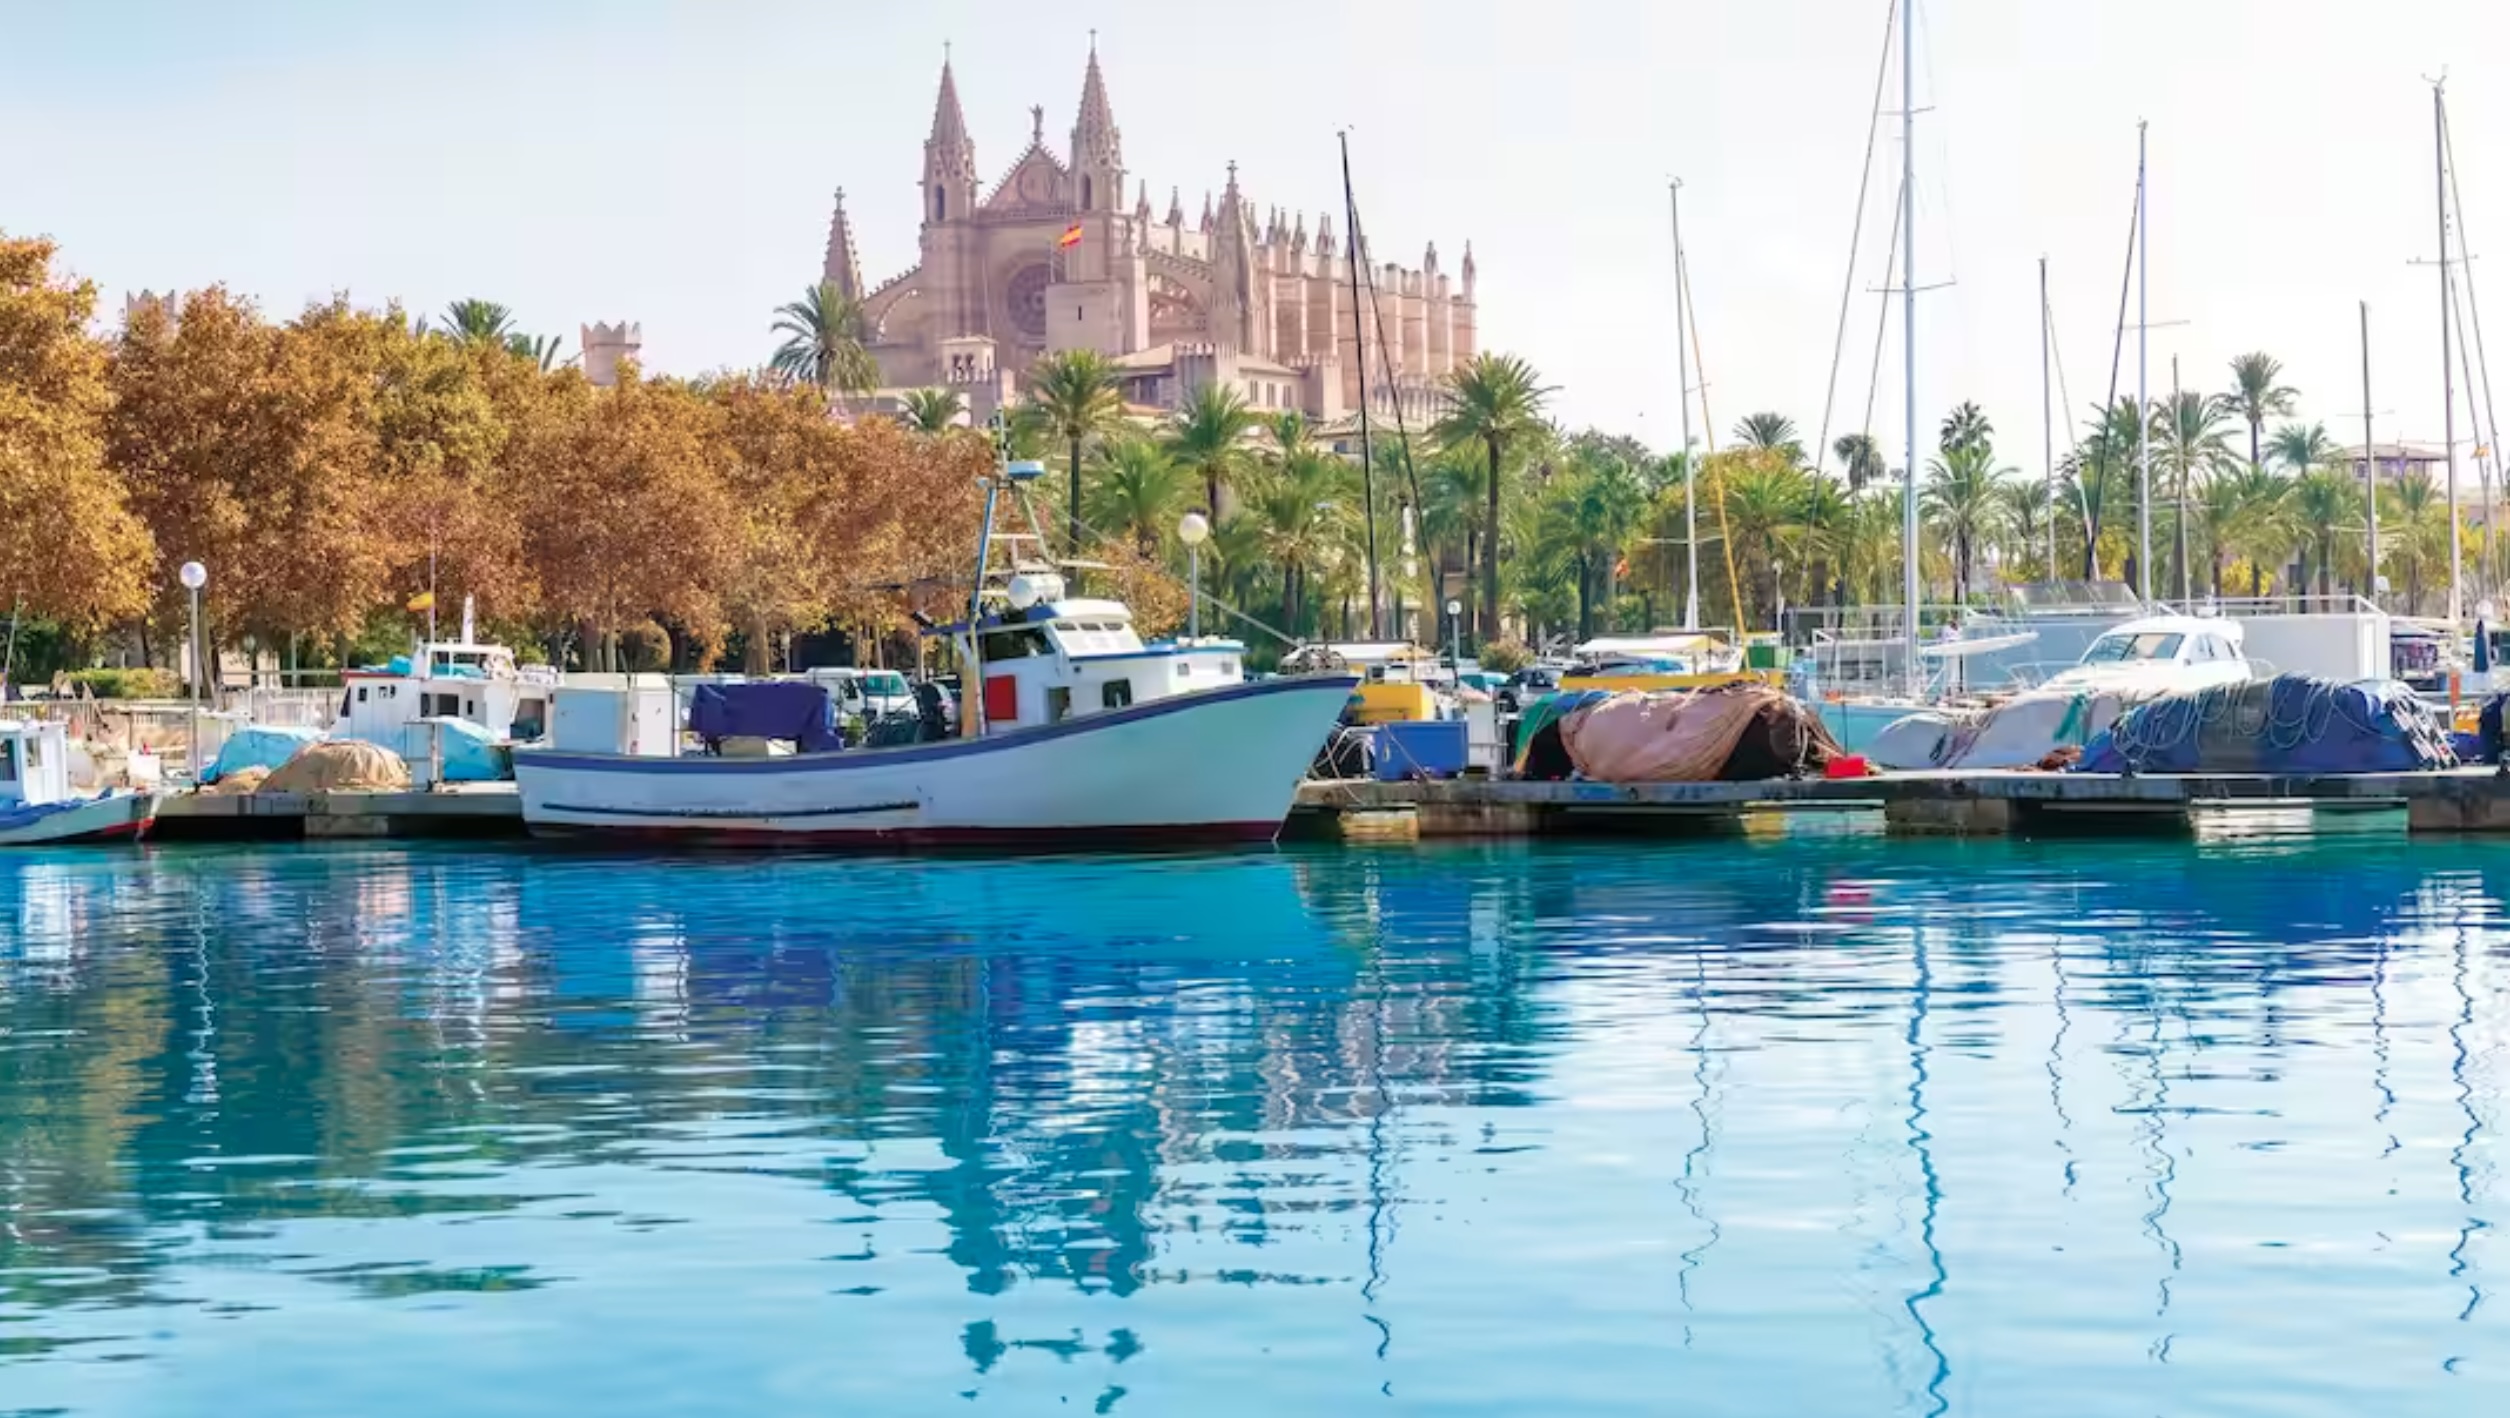 Palma marina with the cathedral in the background, Majorca